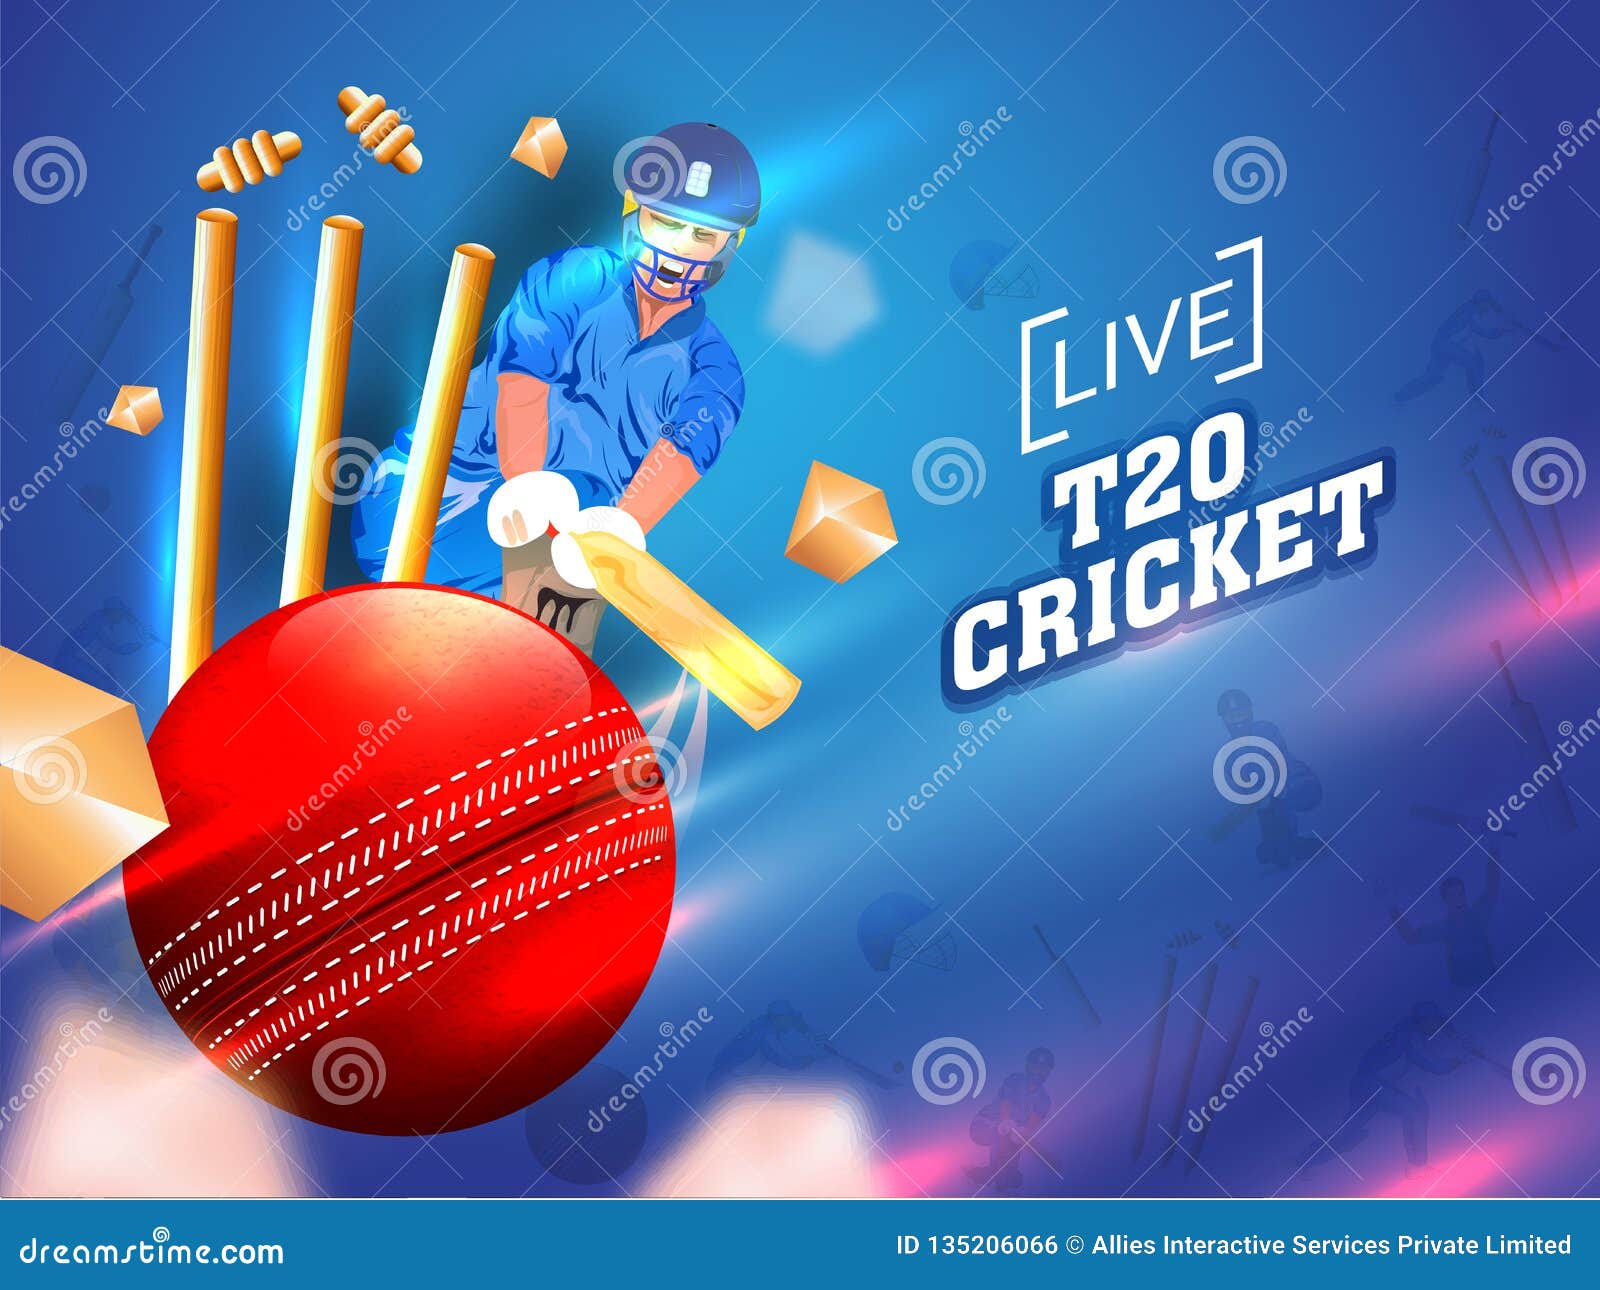 Cricket Player in Playing Action with Close View of Ball and Wicket Stumps  on Glossy Blue Background. T20 Cricket Poster or Banner Stock Illustration  - Illustration of game, championship: 135206066